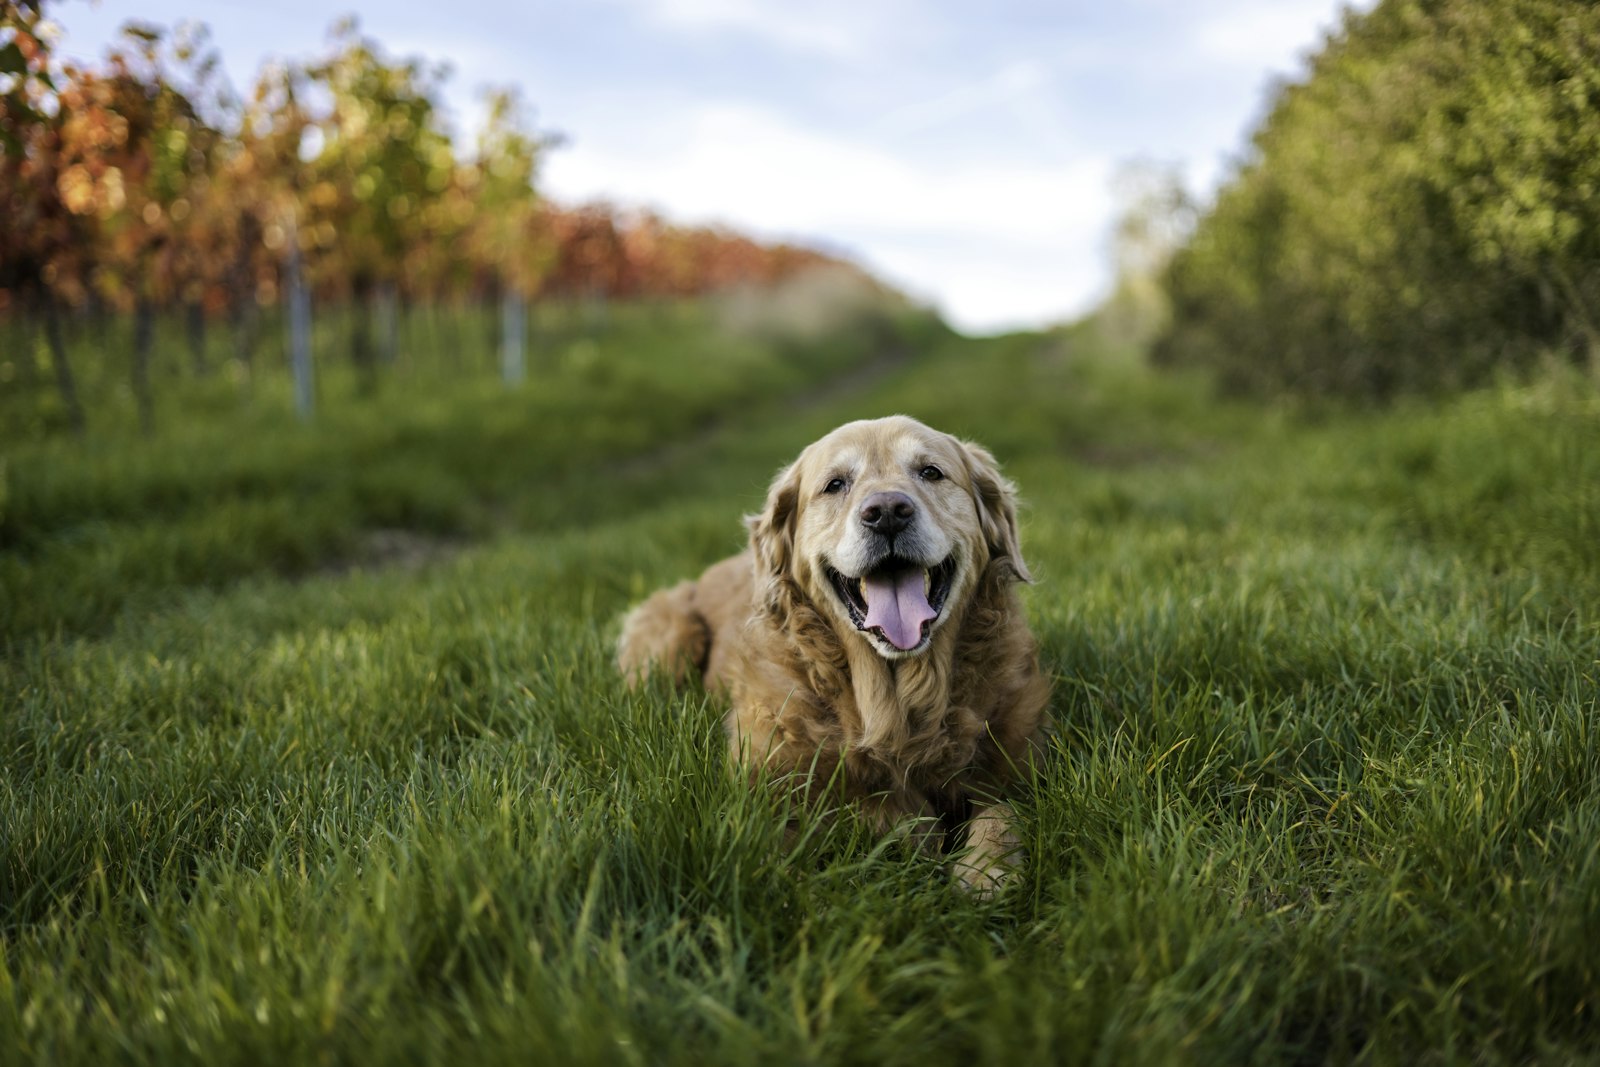 Sony a7 sample photo. Golden retriever puppy sitting photography